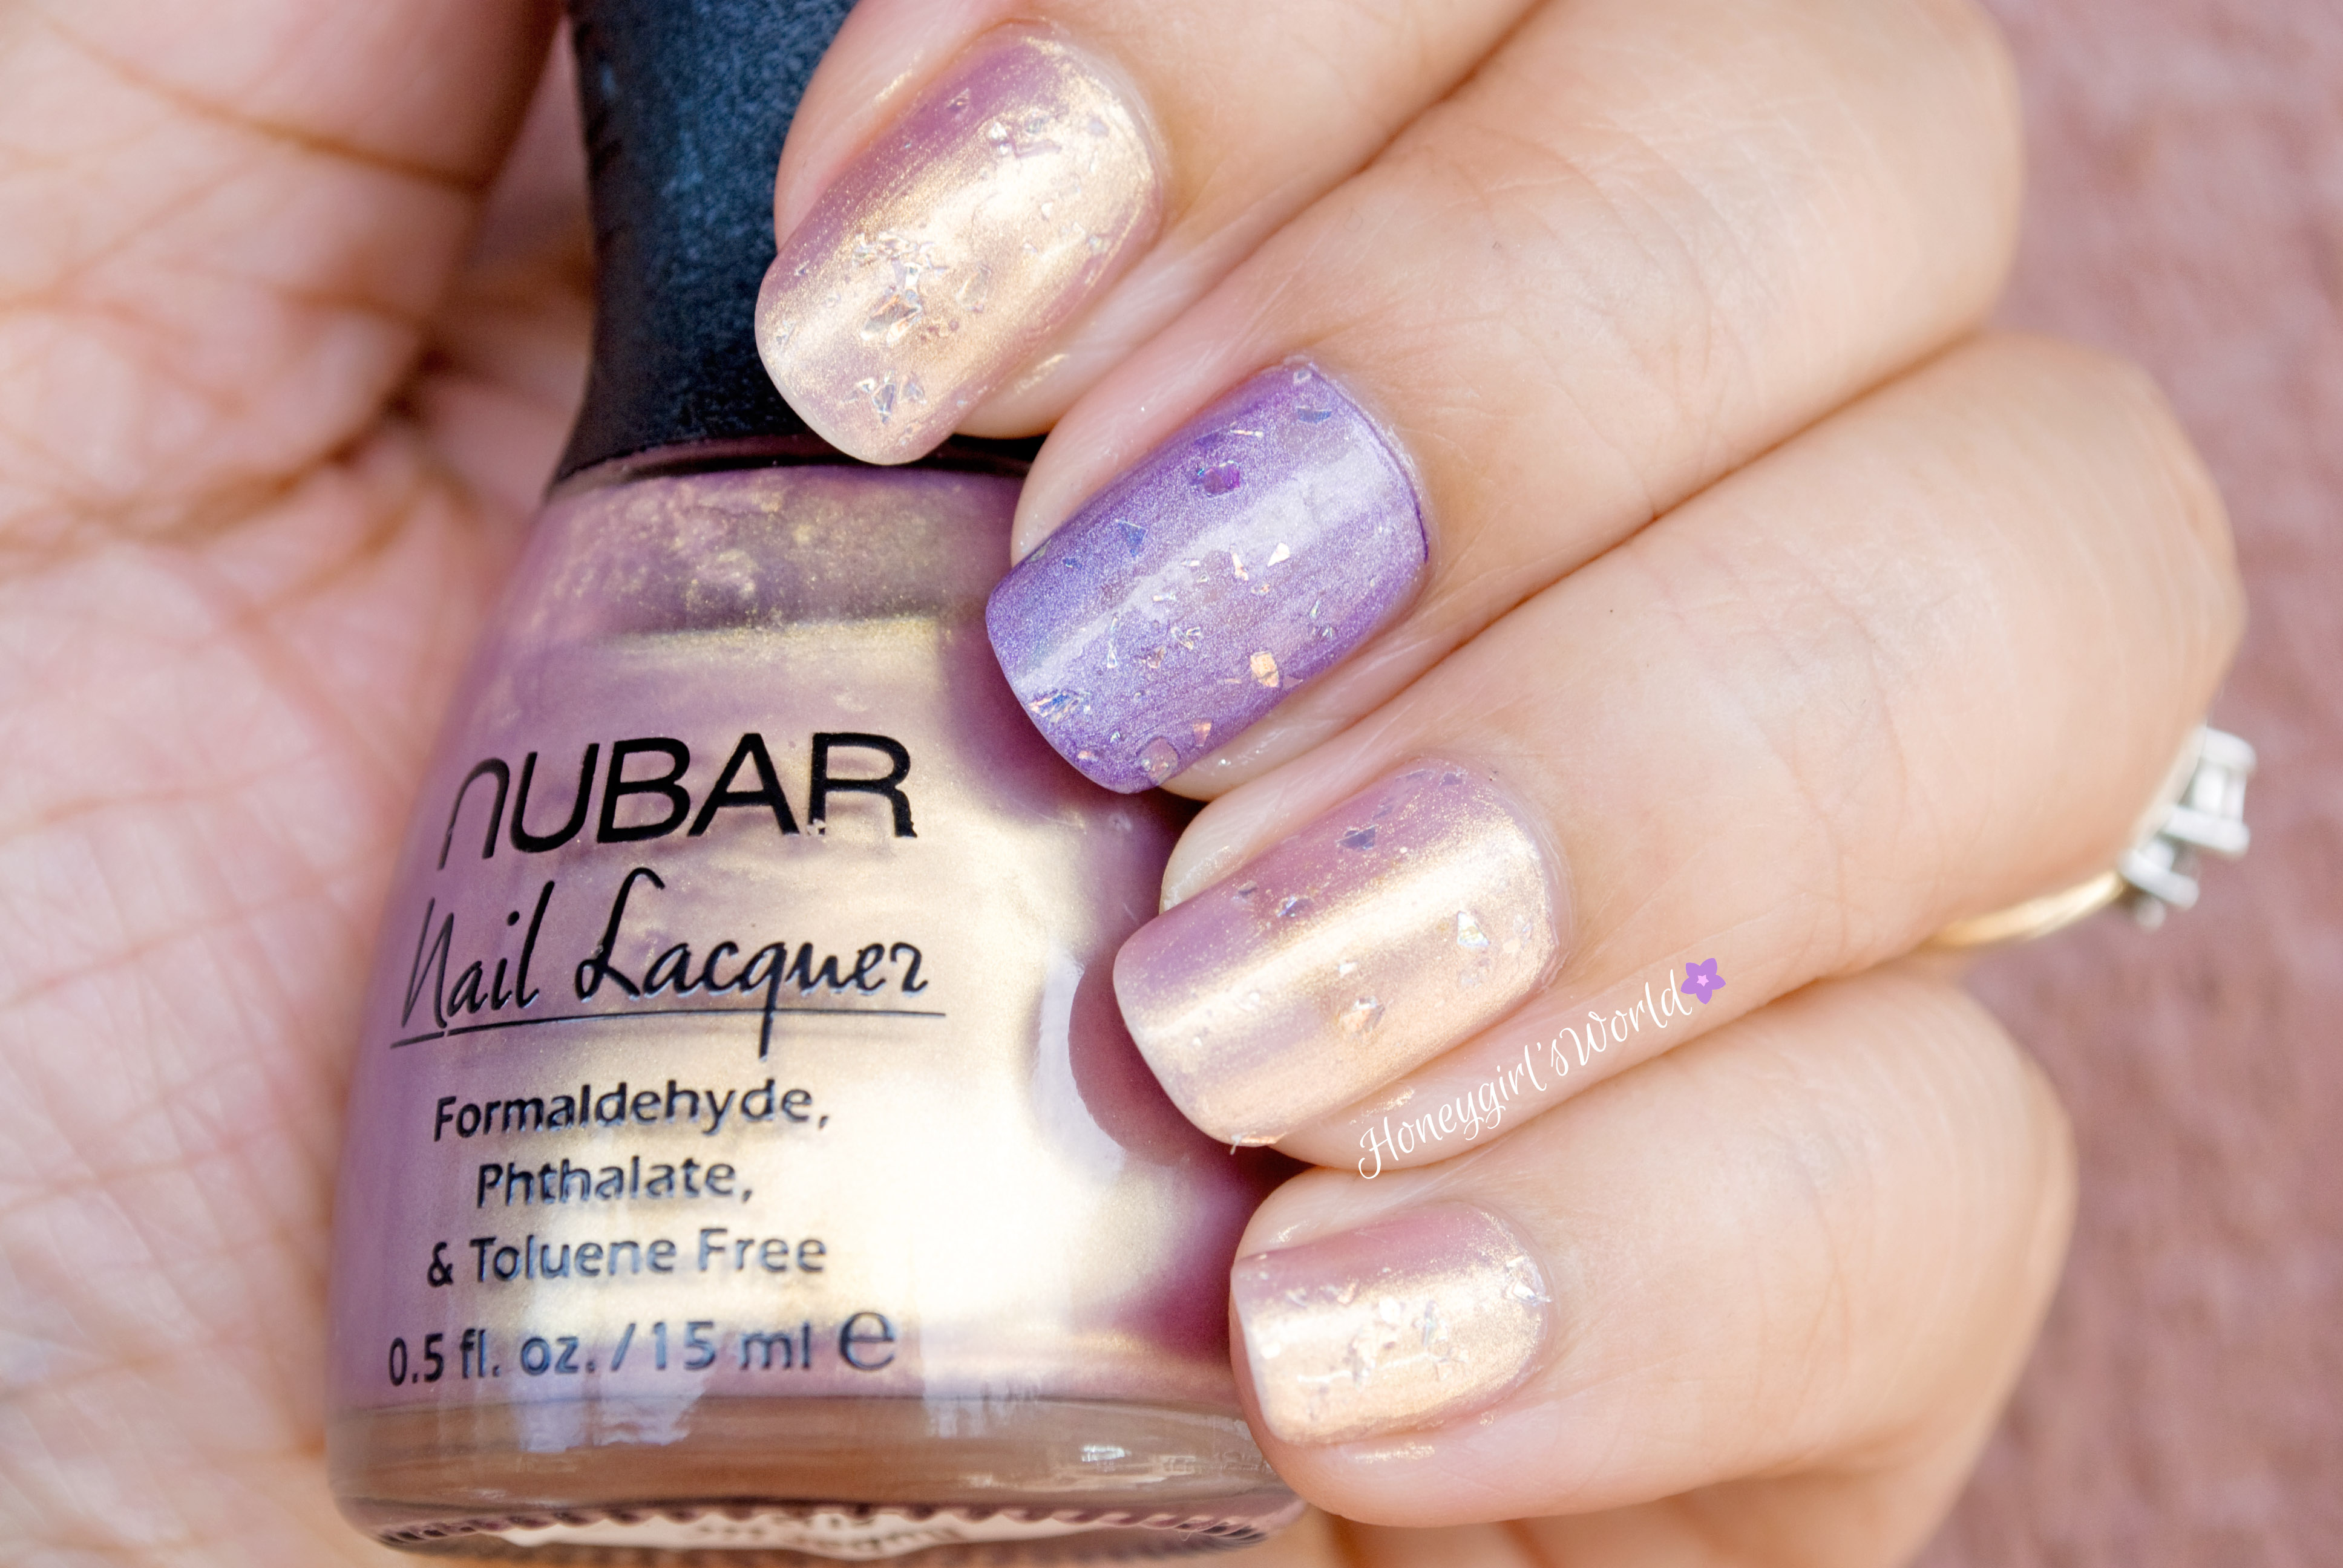 Paradise - Nails of the Week featuring Nubar, China Glaze & Maybelline Color Show